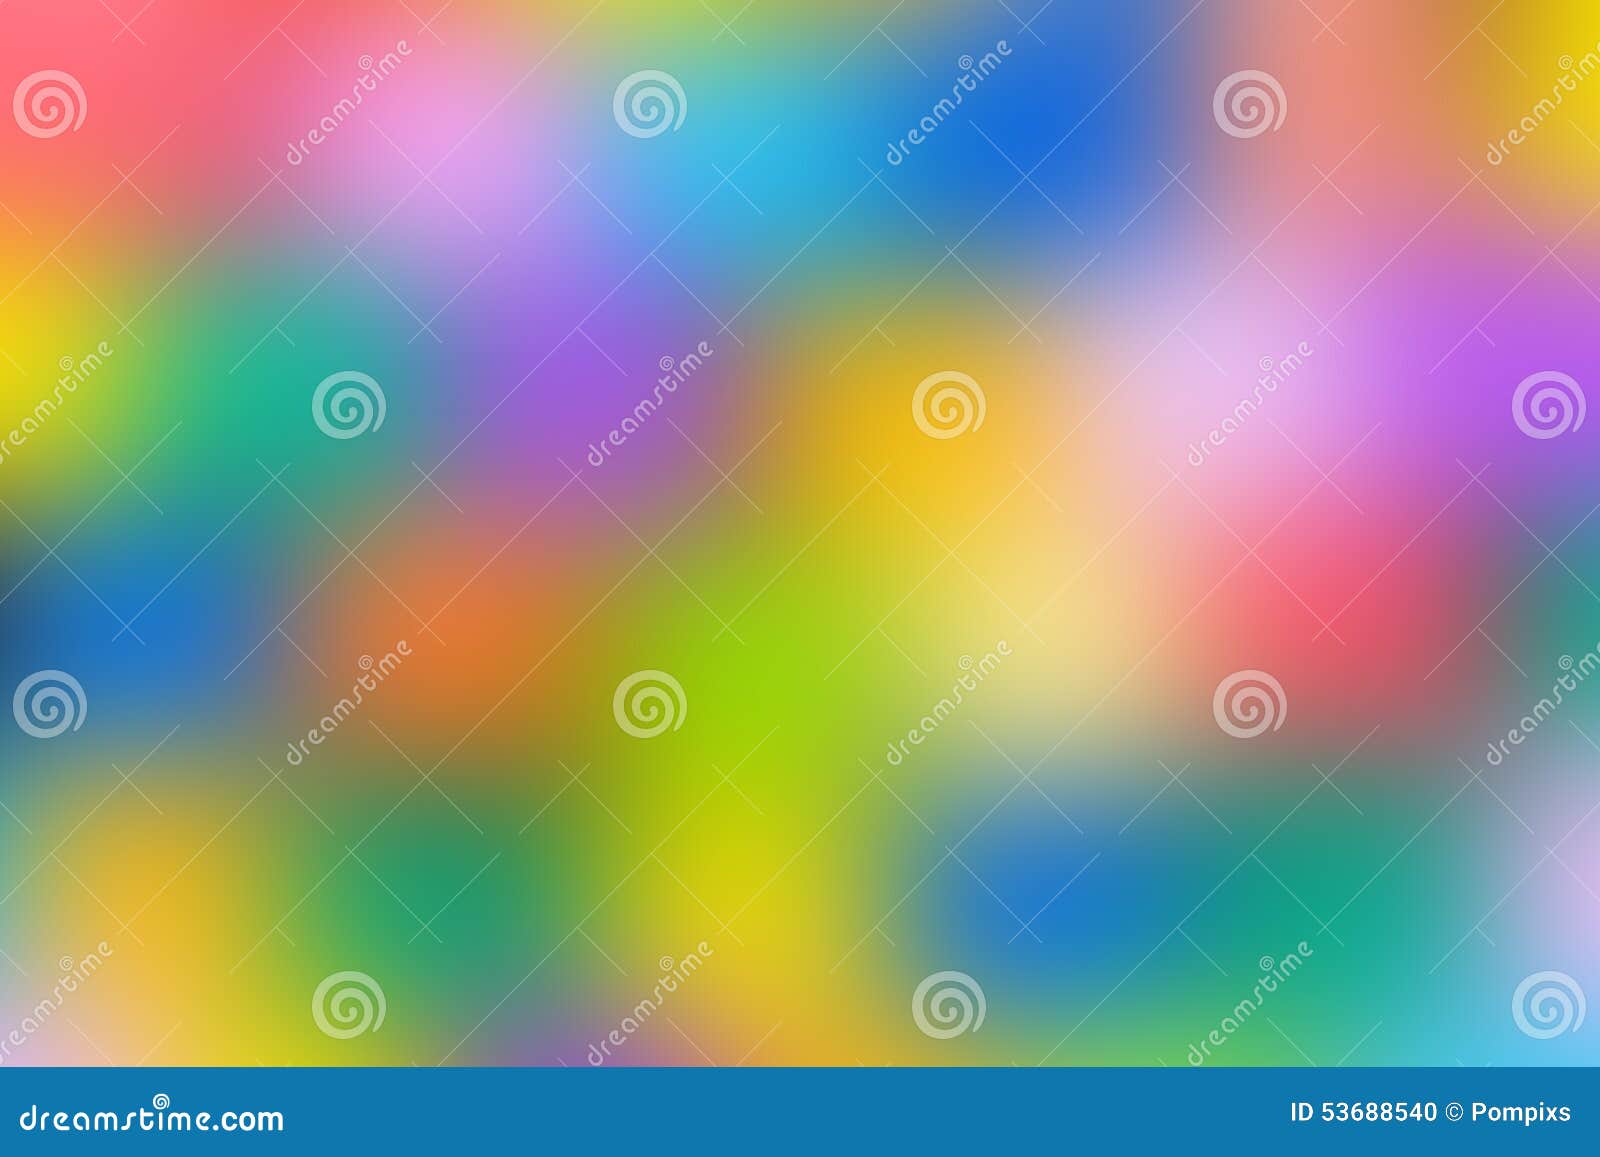 Abstract Rainbow Colourful Paper Background Stock Photo - Image of modern,  decoration: 53688540